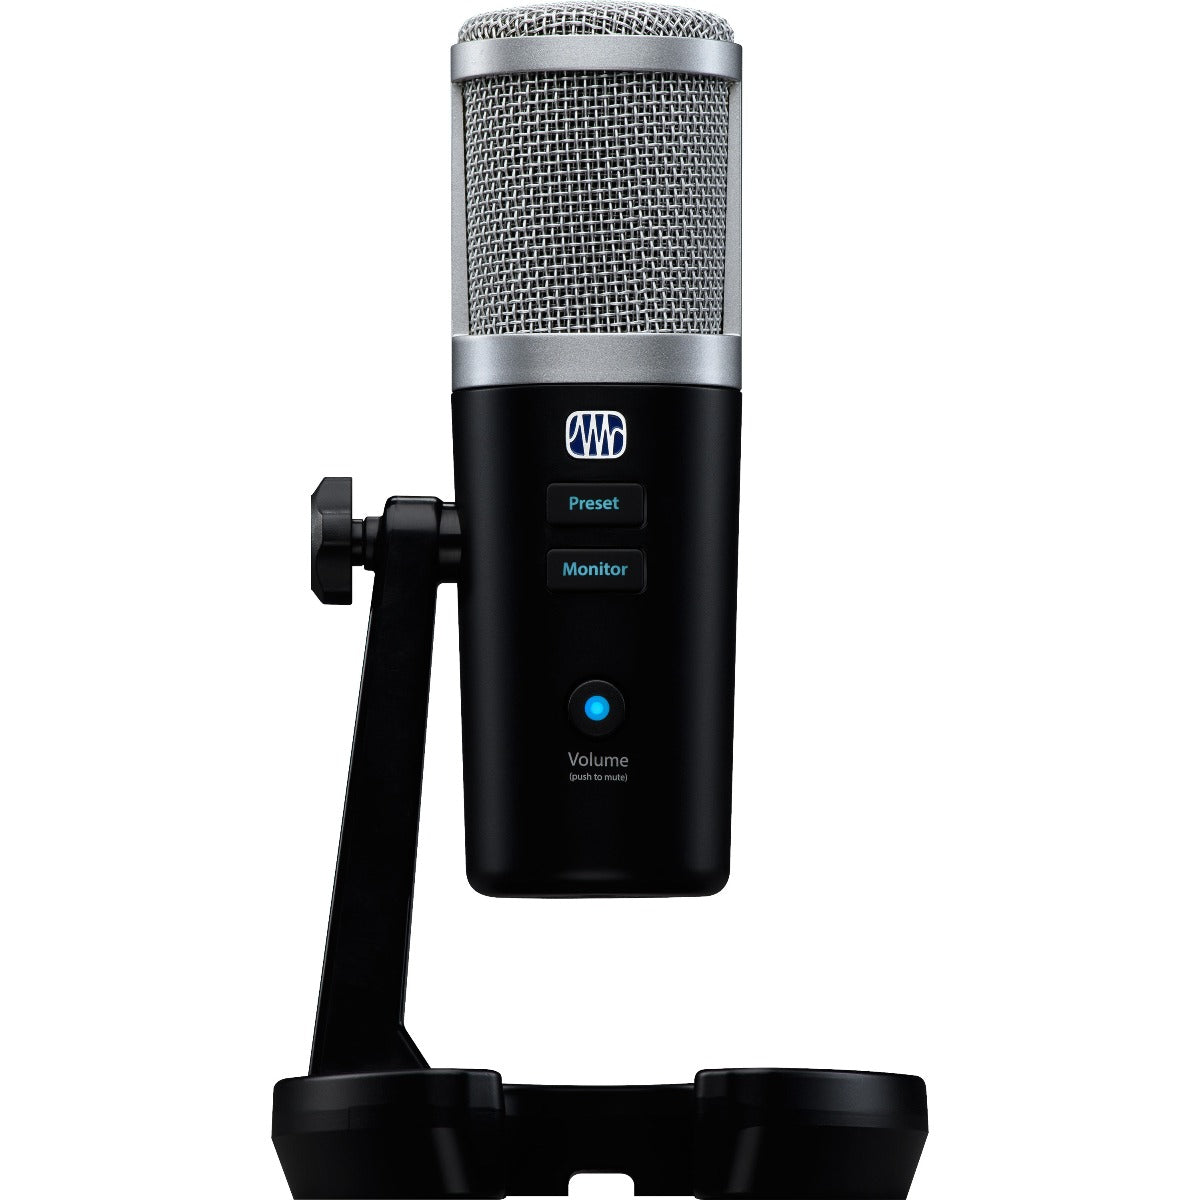 Image of the microphone from a front perspective